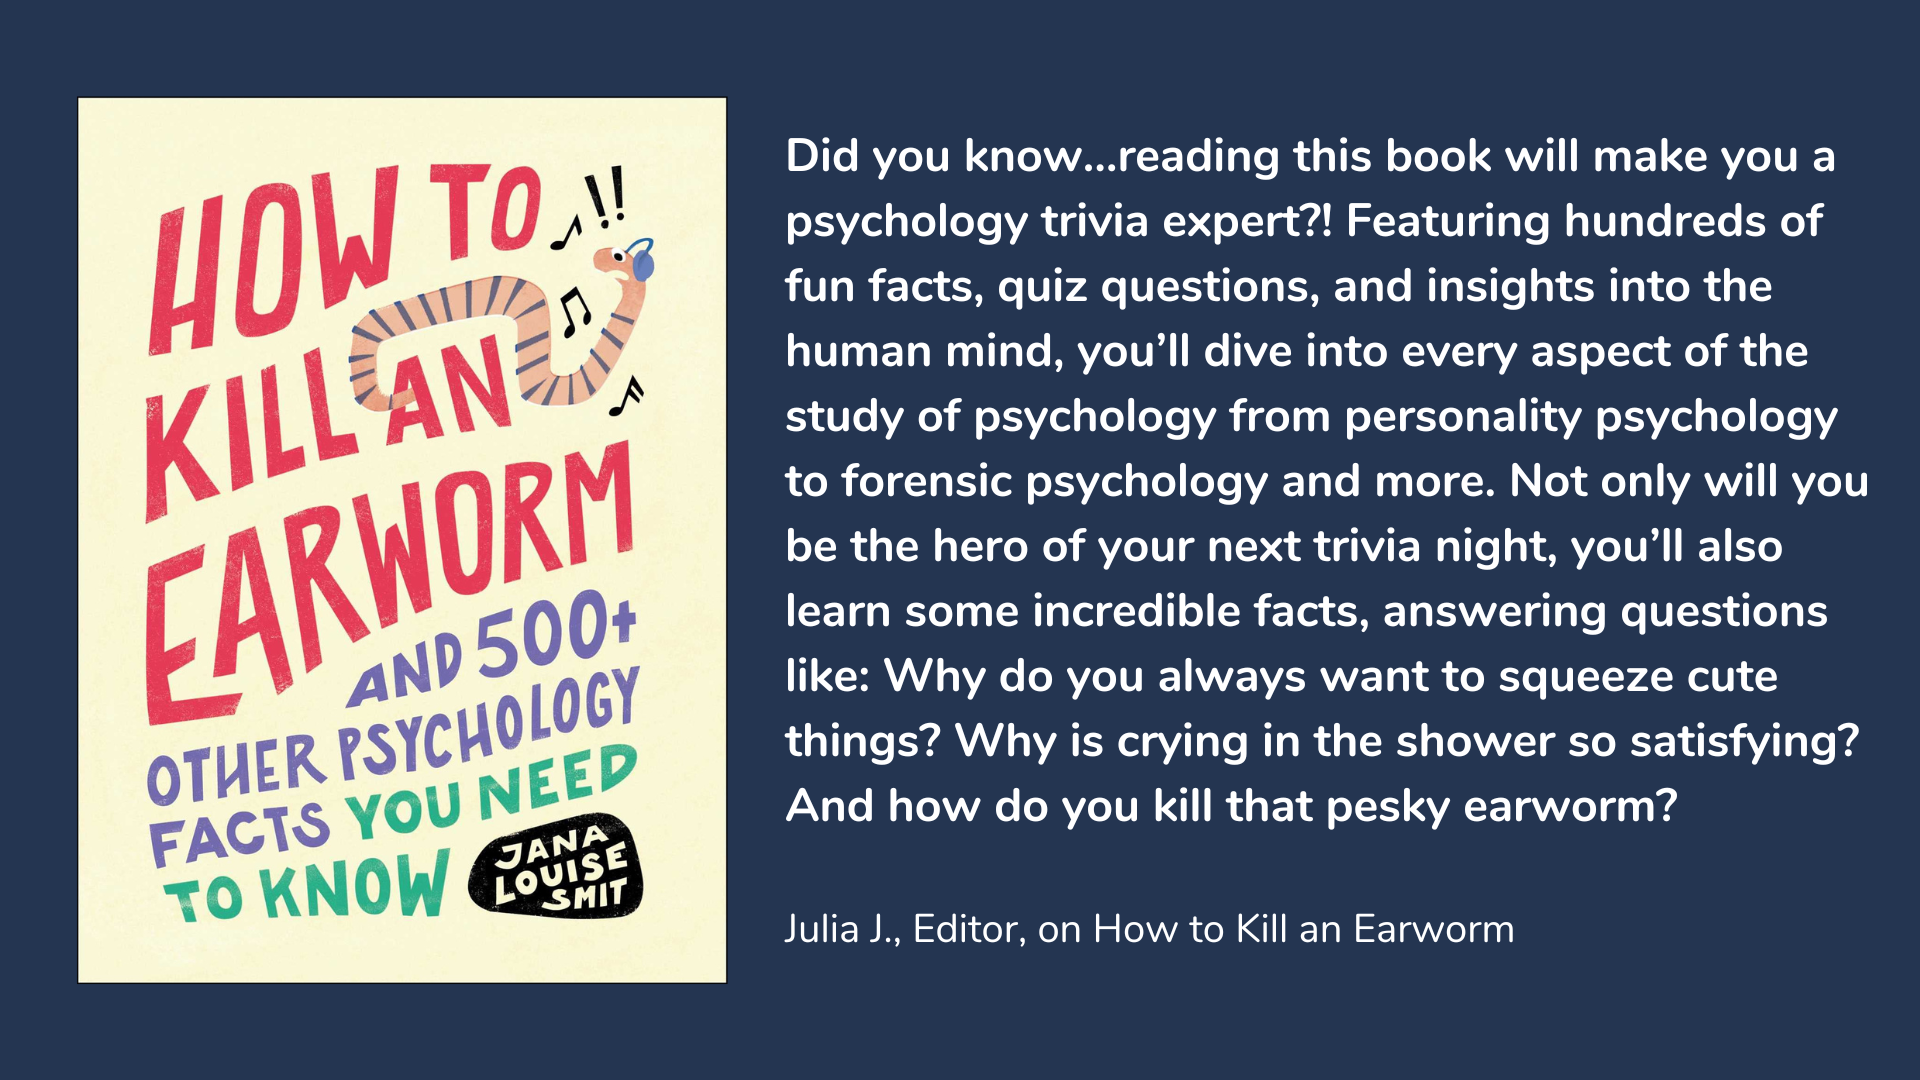 How to Kill an Earworm: And 500+ Other Psychology Facts You Need to Know, book cover and description